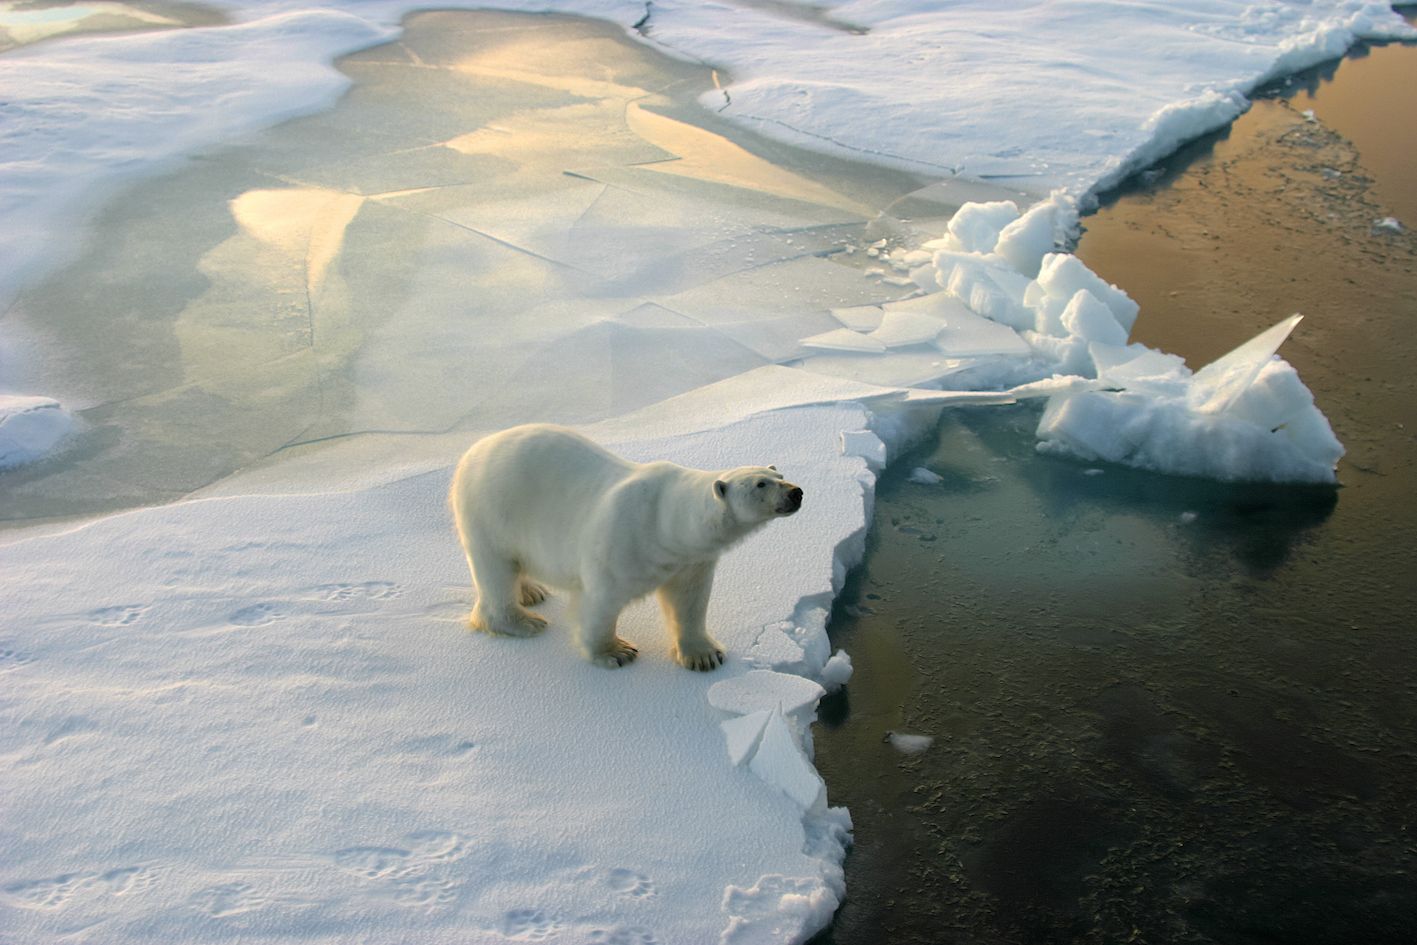 A polar bear on an ice floe, surrounded by the frozen sea.